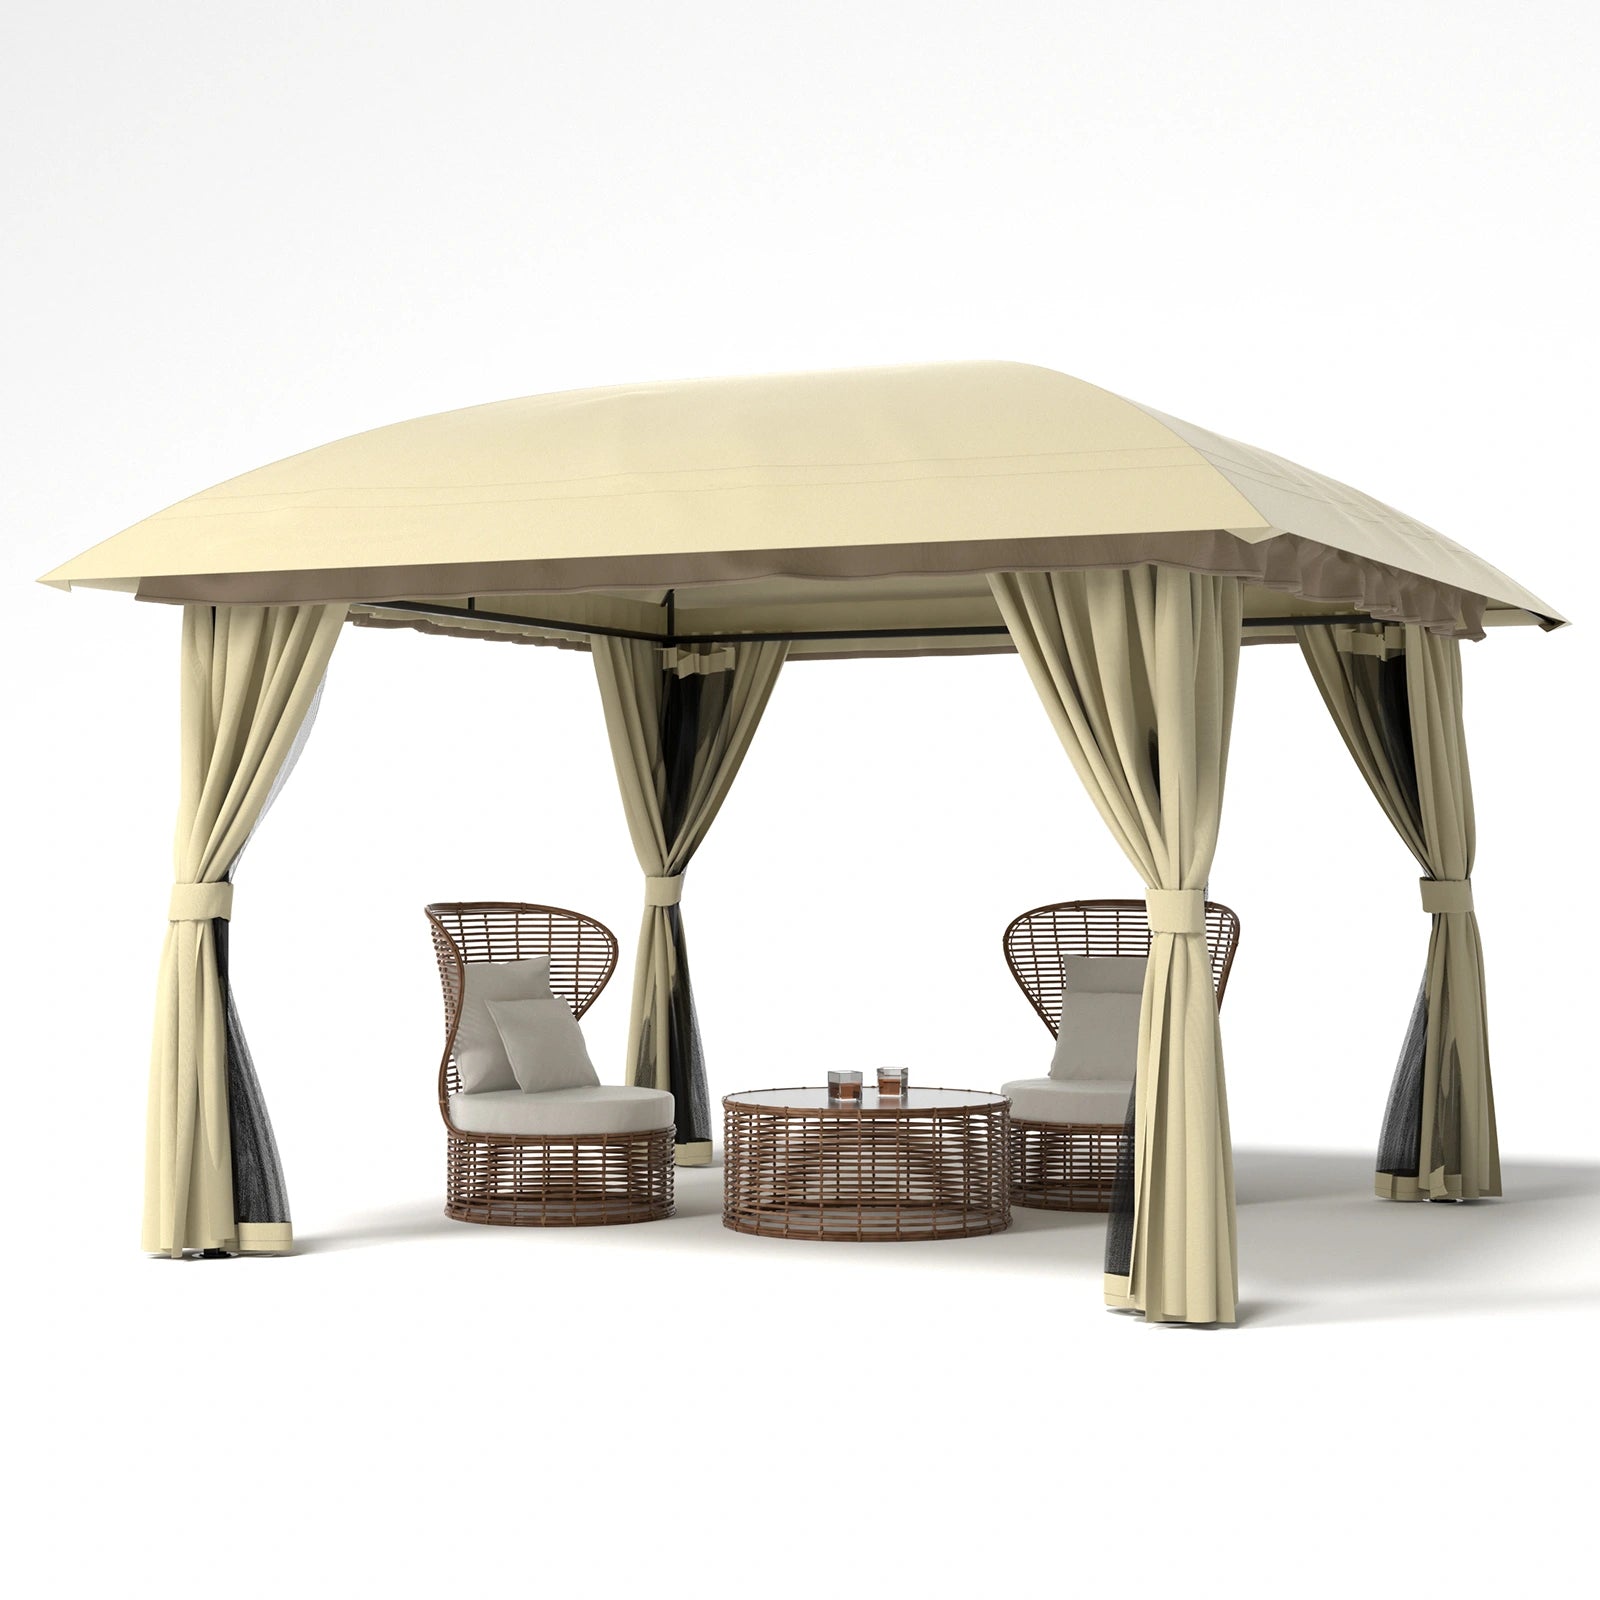 FUNG YARD 11' × 11' Outdoor Patio Gazebo with Netting and Curtains